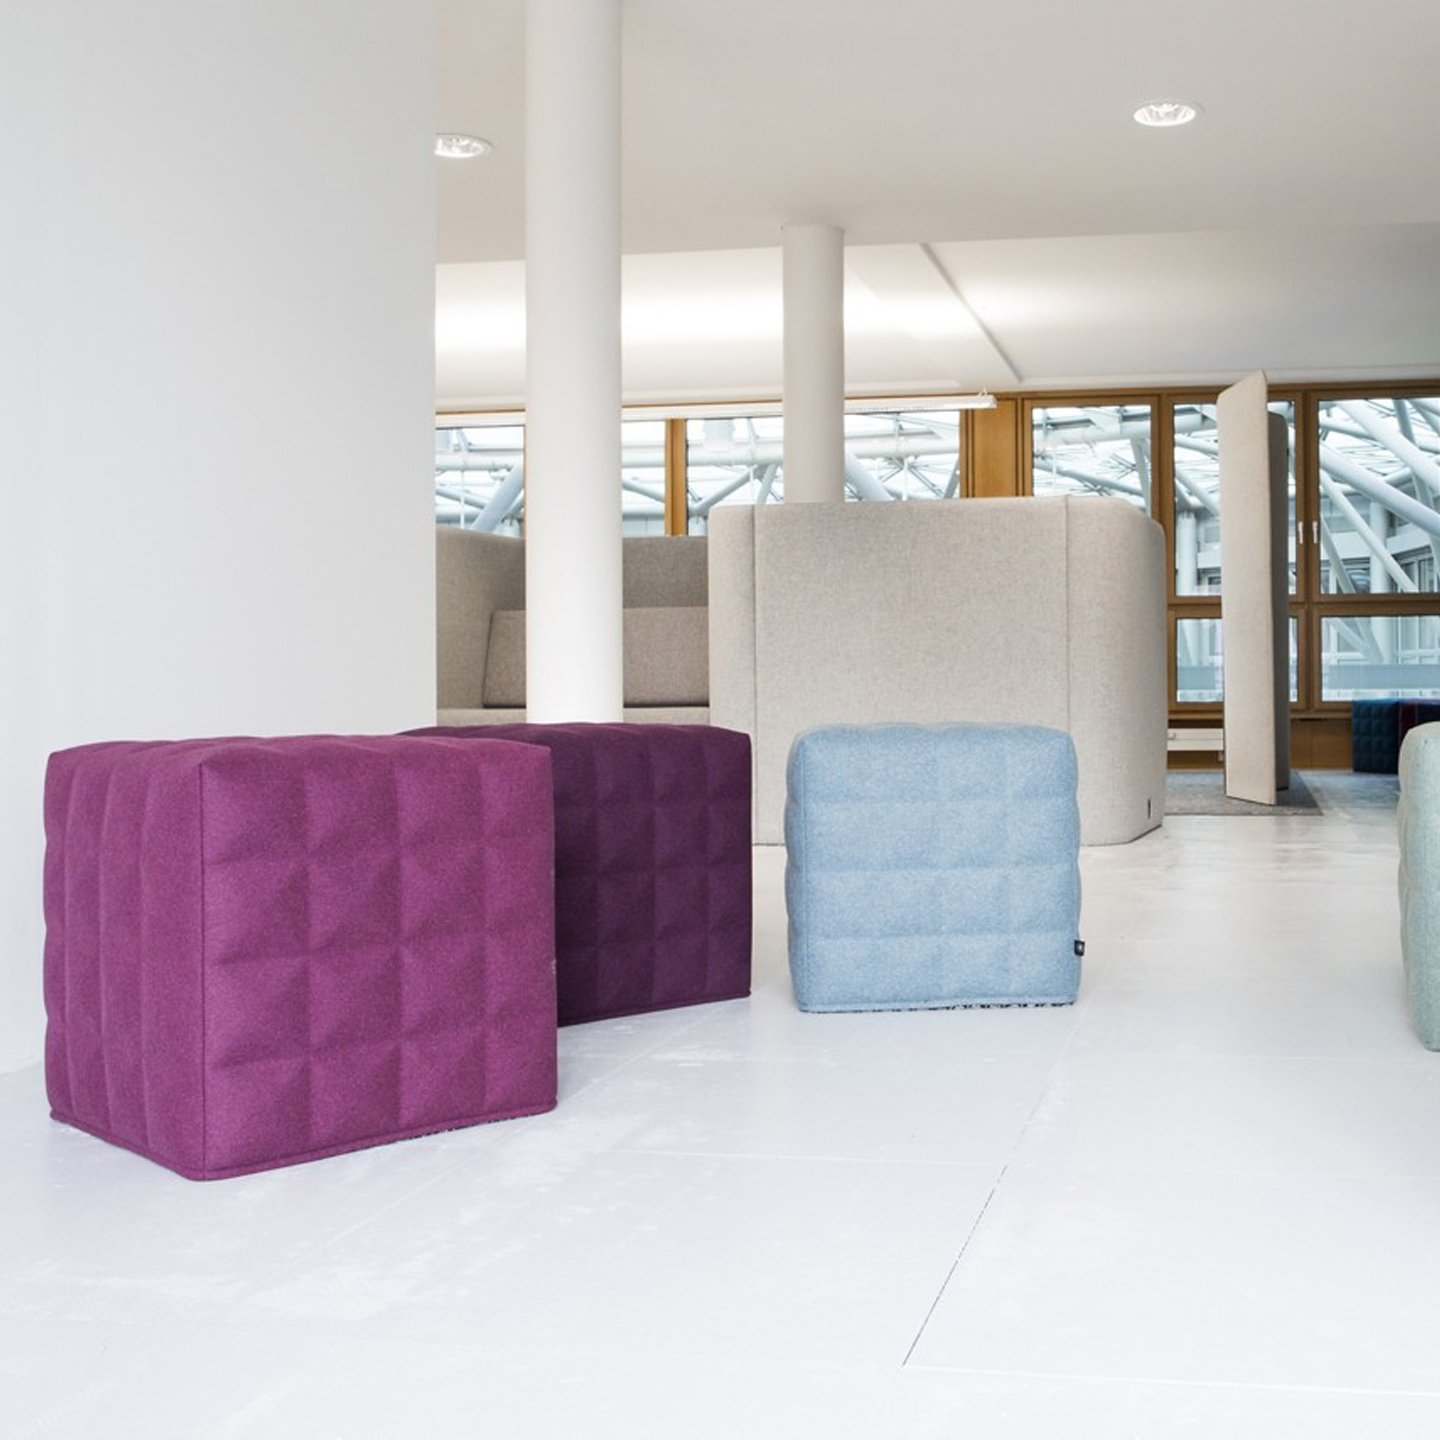 Haworth Buzzicube seating in pastel shades like pink, purple, blue